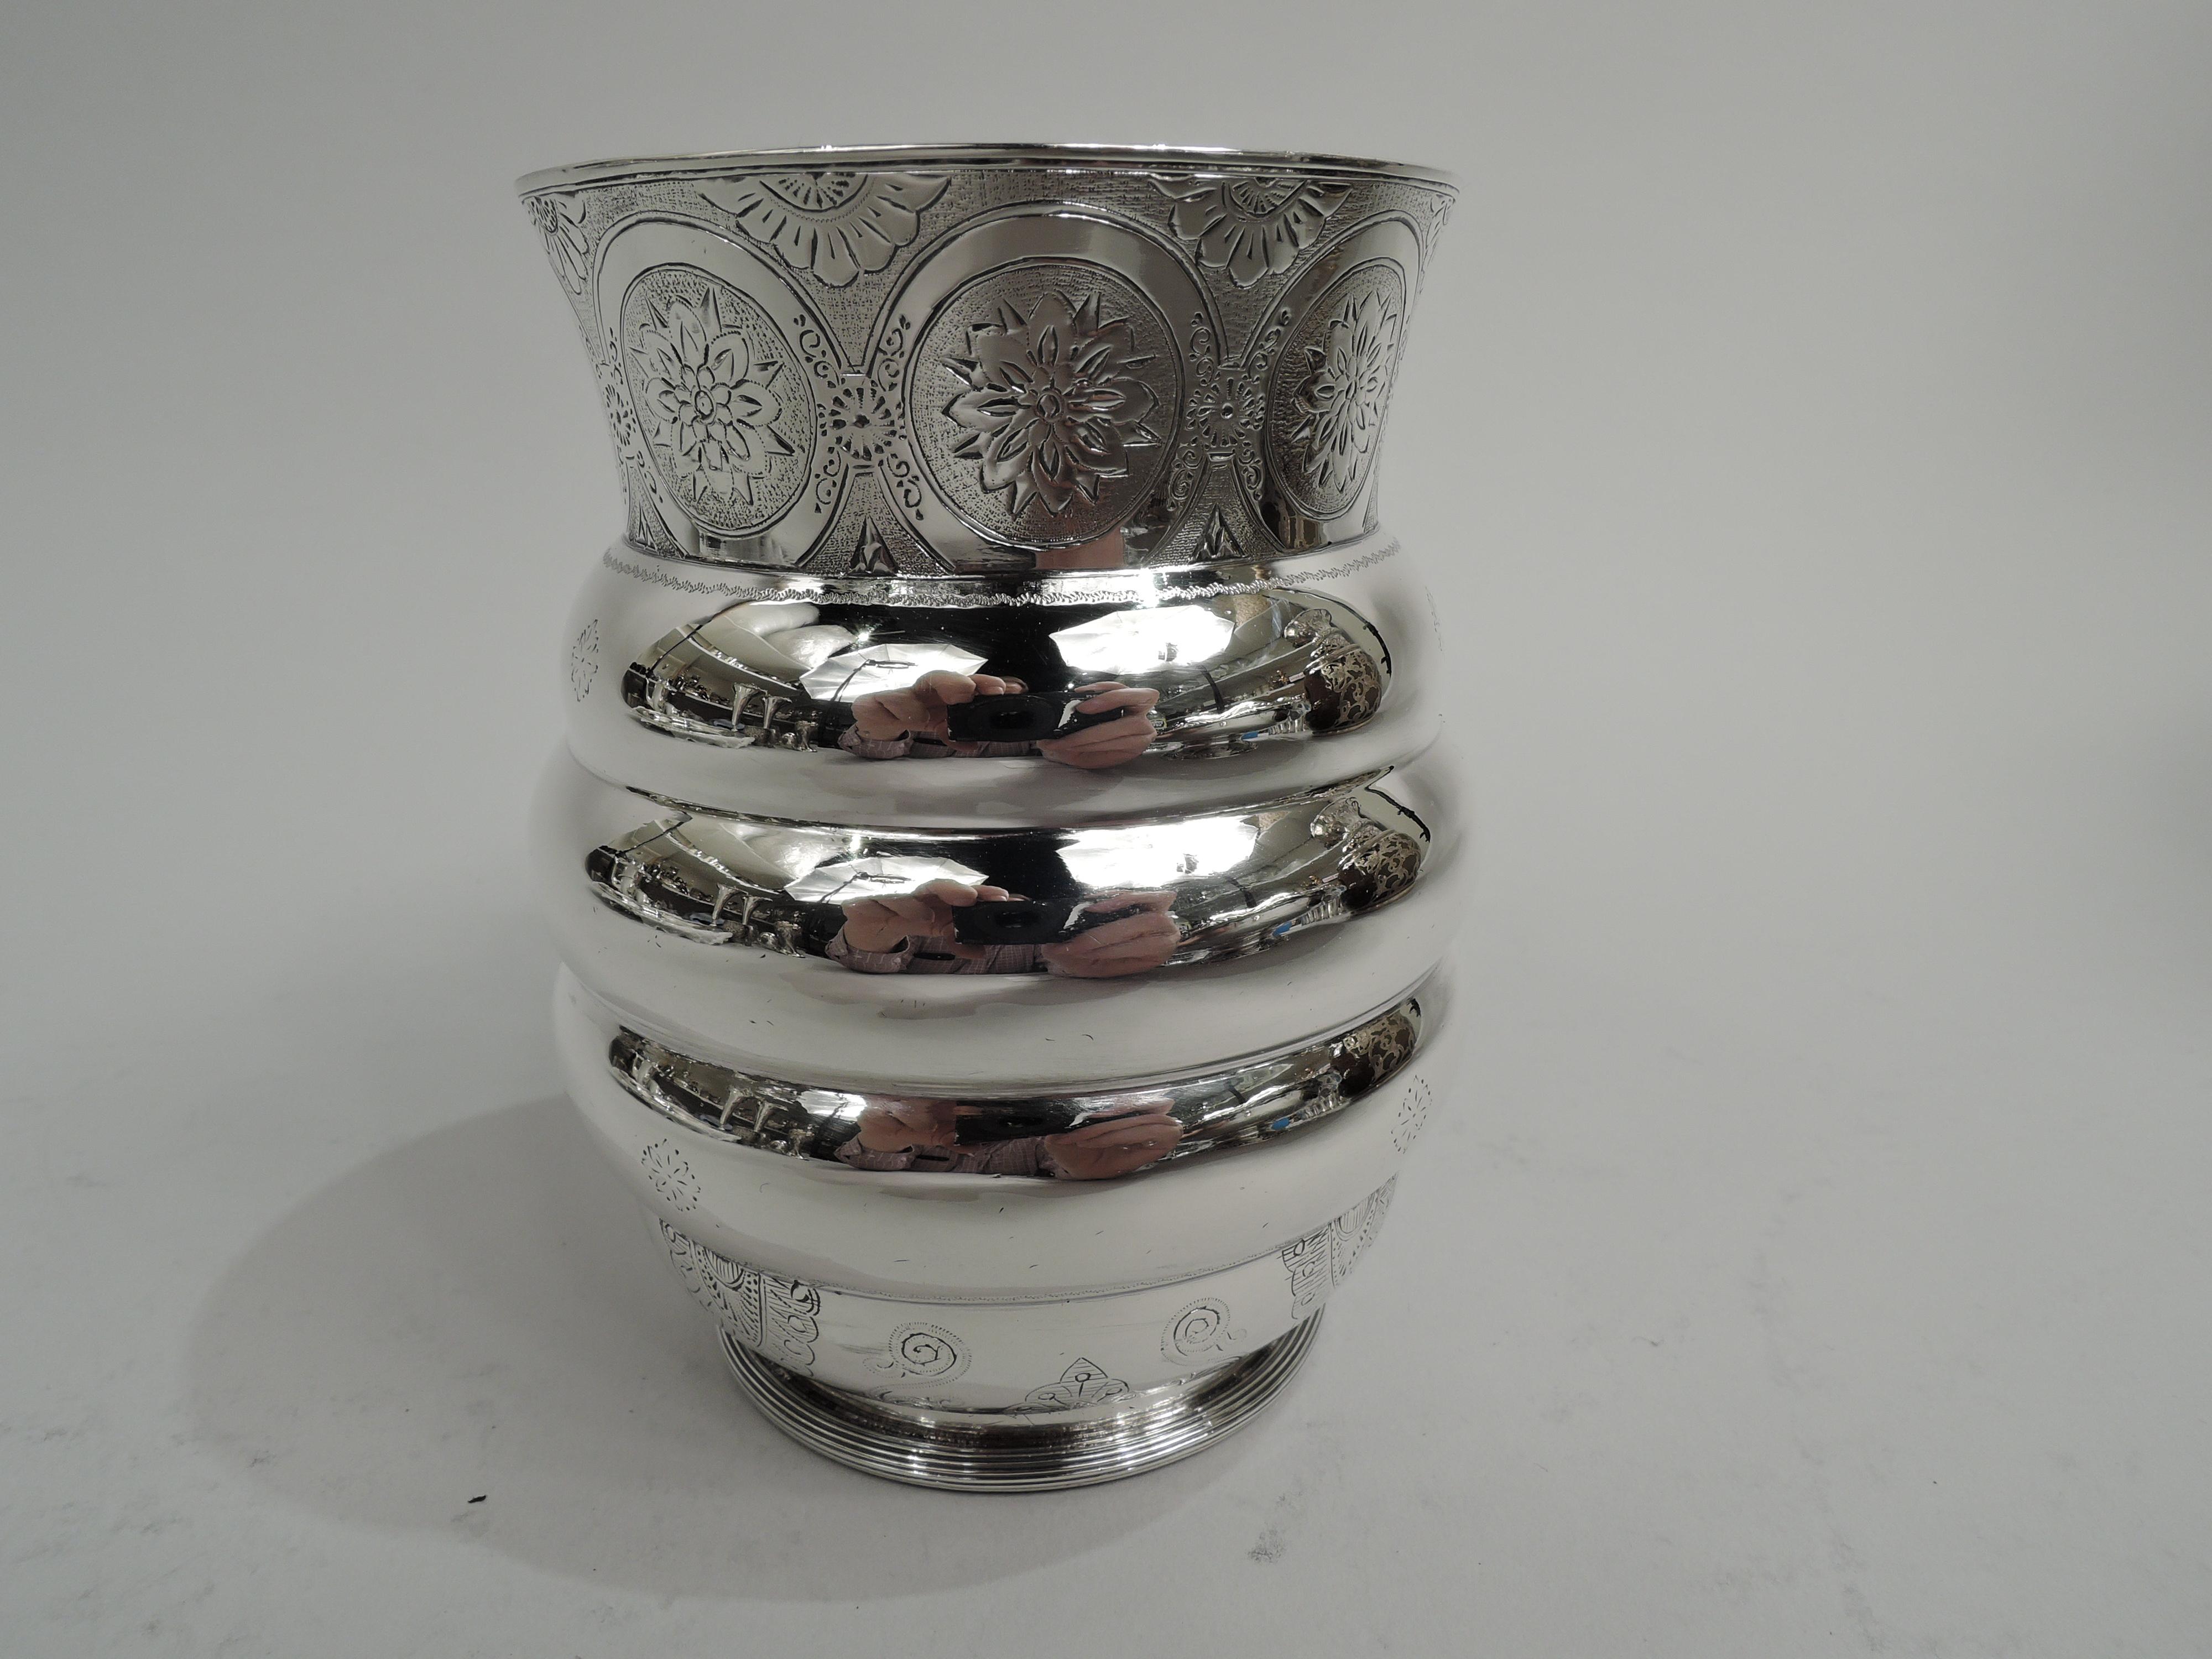 Rare and unusual Aesthetic sterling silver baby cup. Made by Tiffany & Co. in New York. Beehive-form with lobed rings; tapering neck, c-scroll handle with elongated split mount and bands, and raised and reeded foot. Engraved stylized ornament on